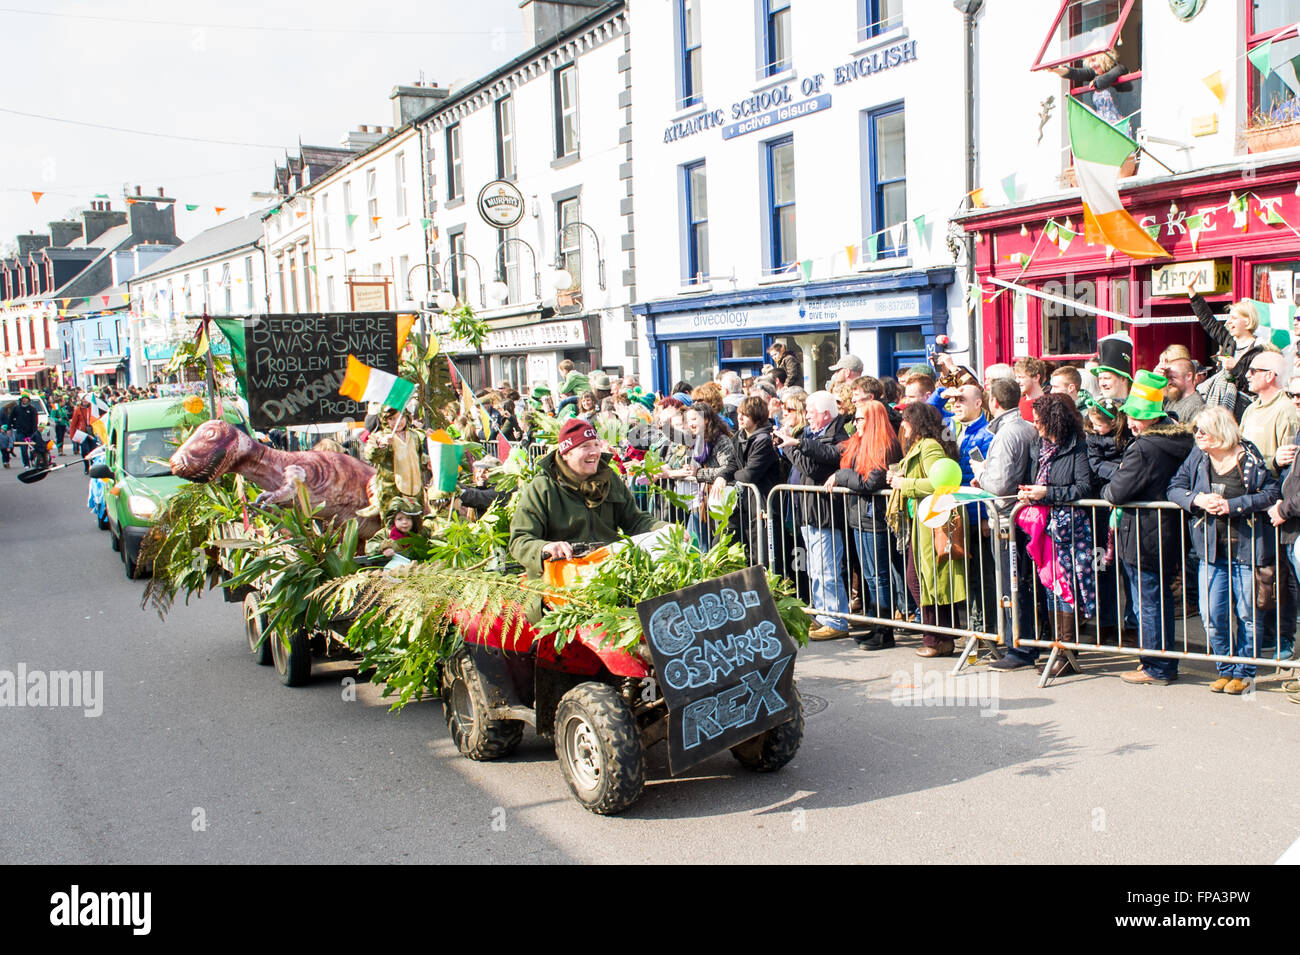 Schull, Irlande. 17 mars, 2016. L'Schull St Patrick's Day procession passe des centaines de sections locales sur Schull rue principale. Credit : Andy Gibson/Alamy Live News. Banque D'Images